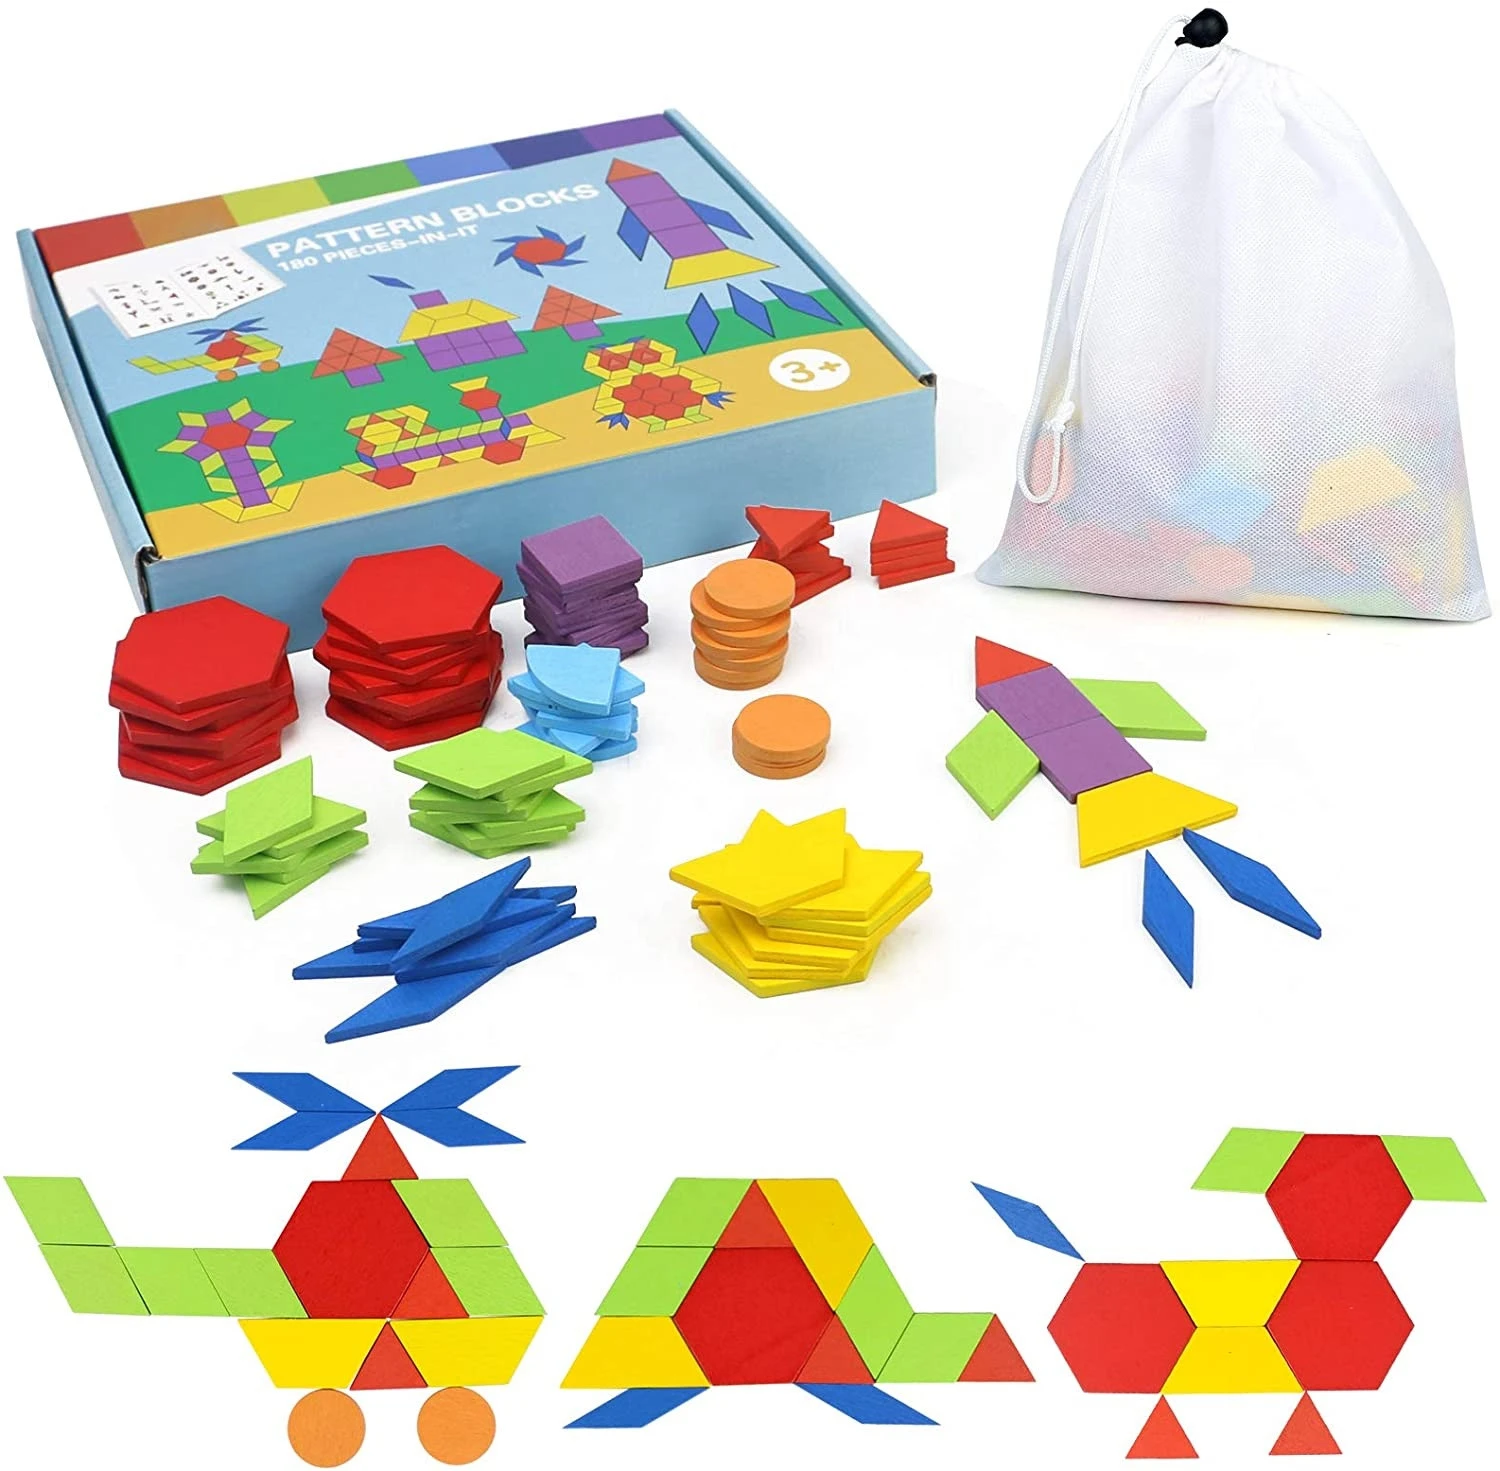 2020 New Wooden Jigsaw Shapes Puzzles with Booklet Kids Toddler Wooden Puzzles Tangram Montessori Toys Puzzle Toys for Child